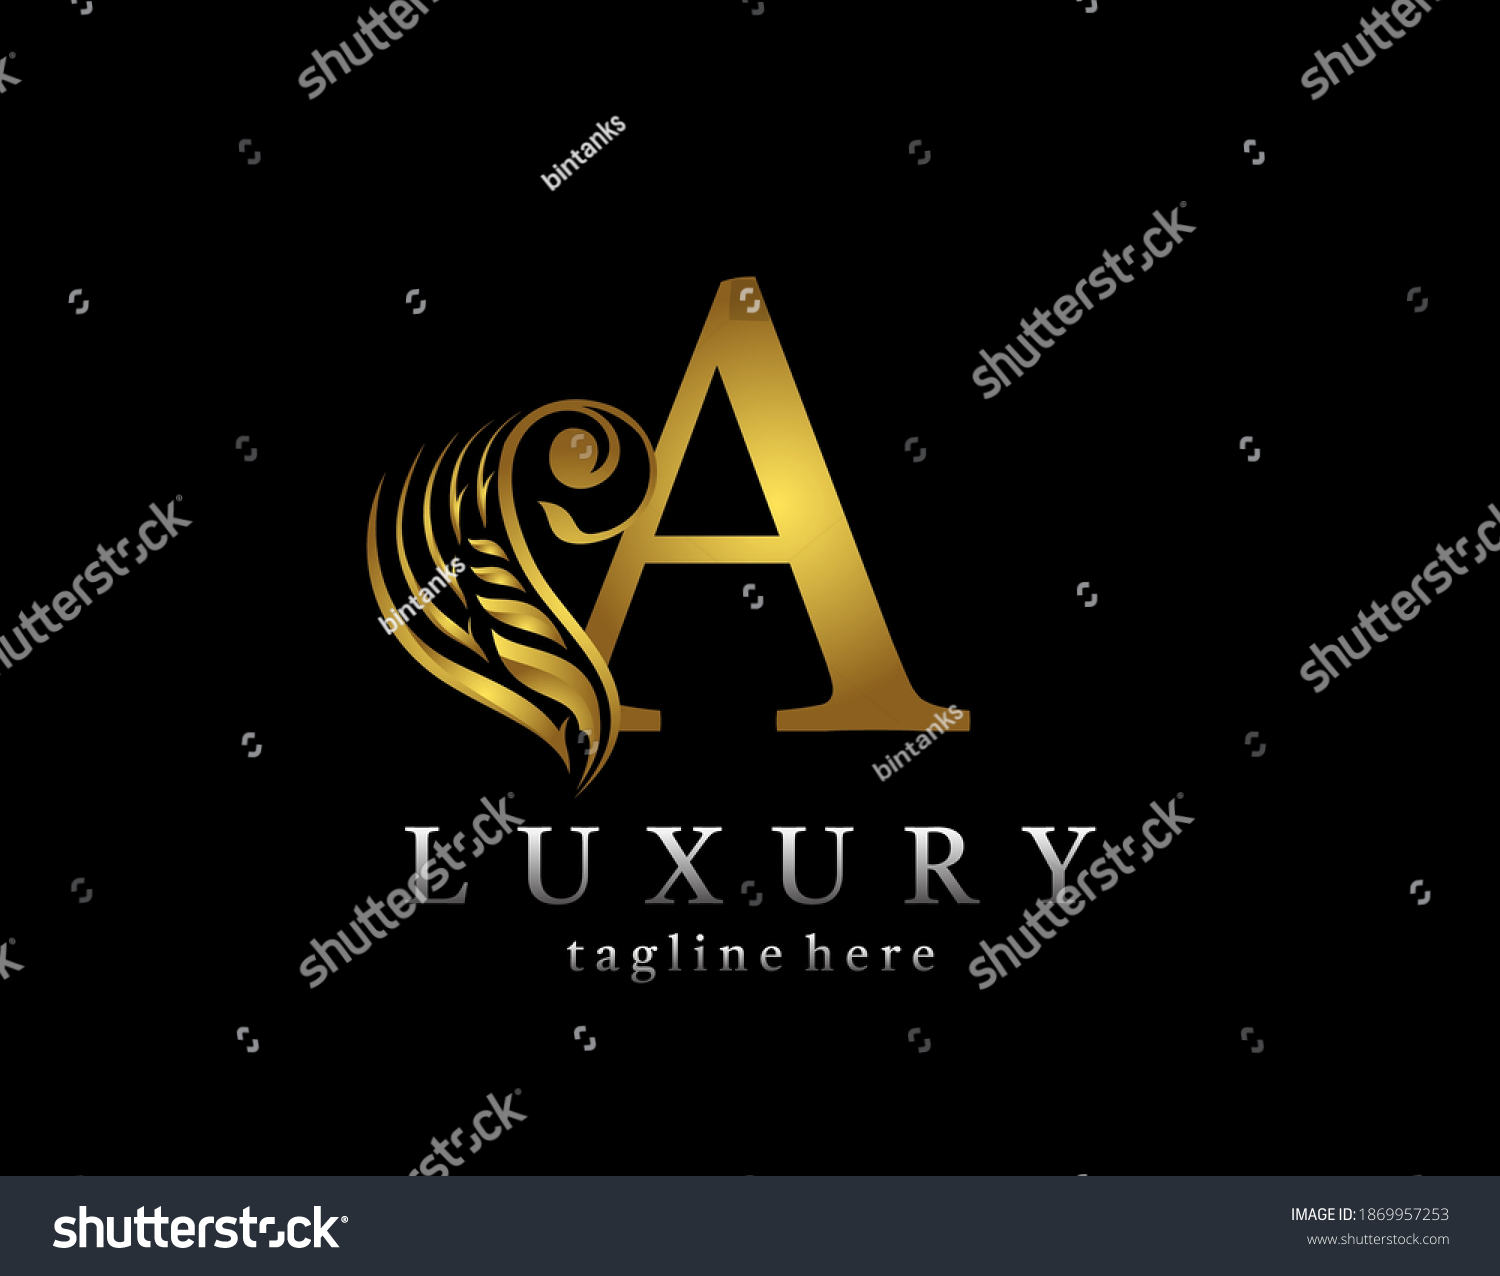 Golden Initial Letter Luxury Beauty Flourishes Stock Vector Royalty Free Shutterstock